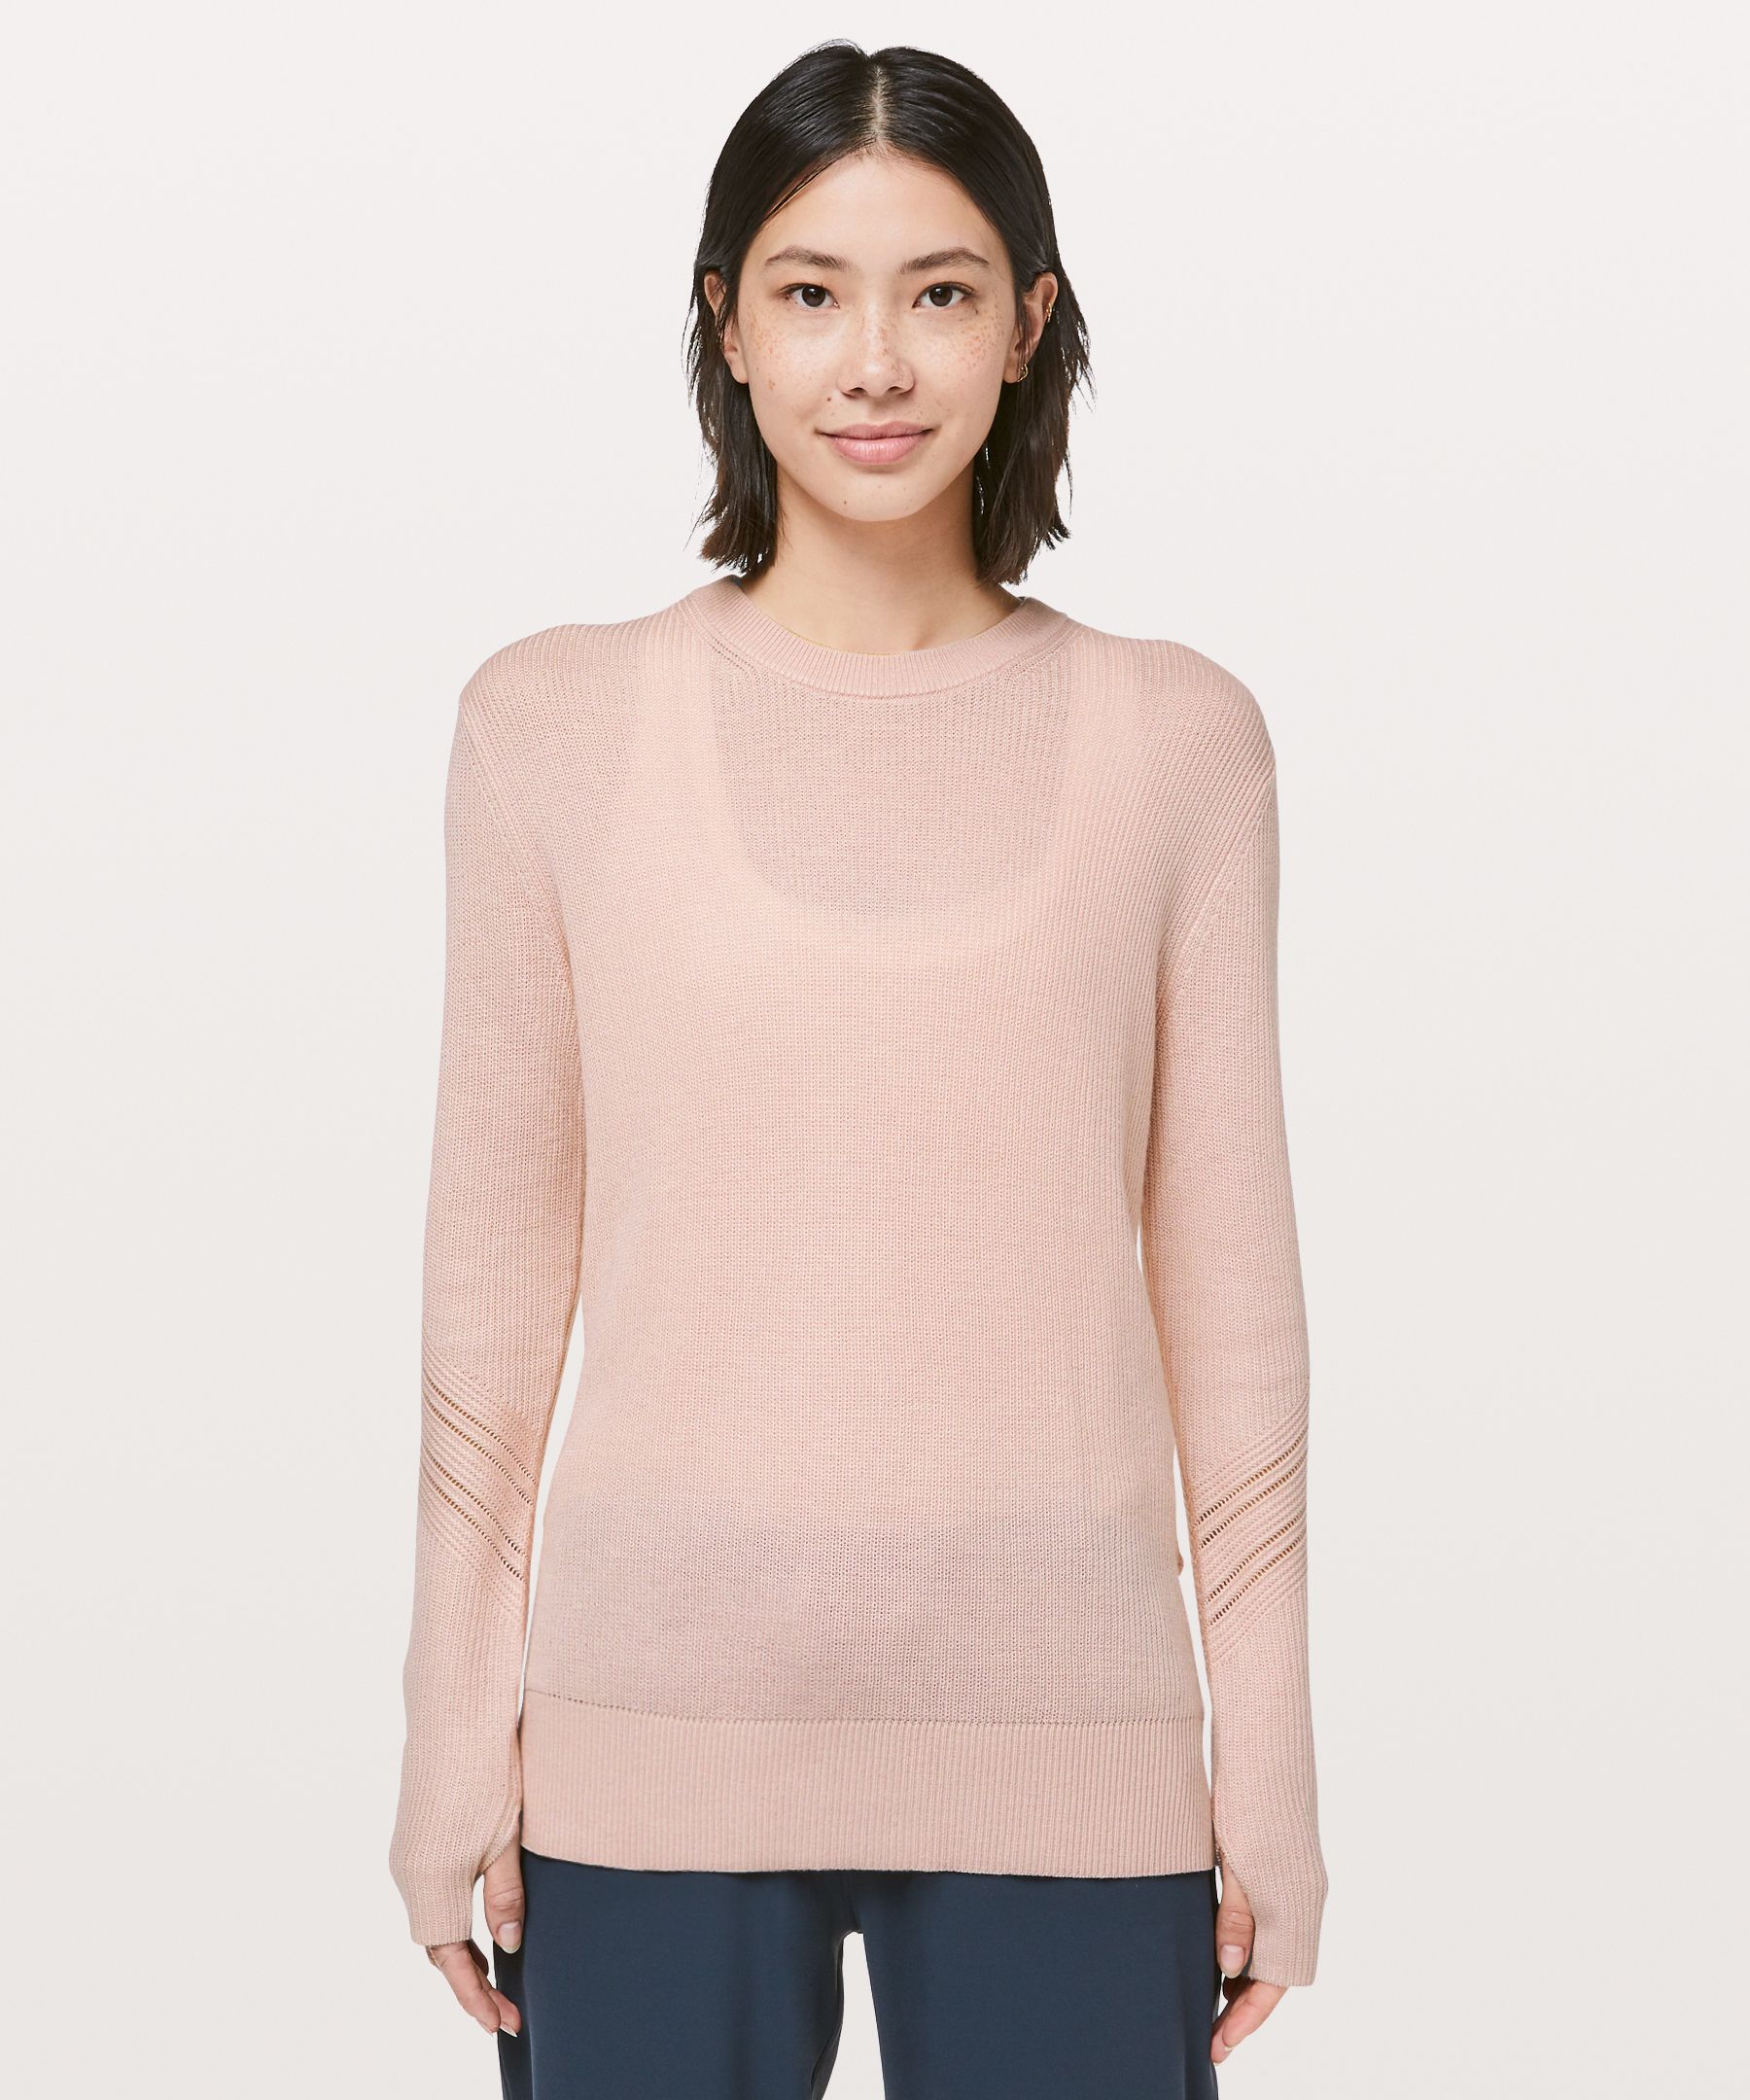 Lululemon Time To Restore Sweater In Misty Pink